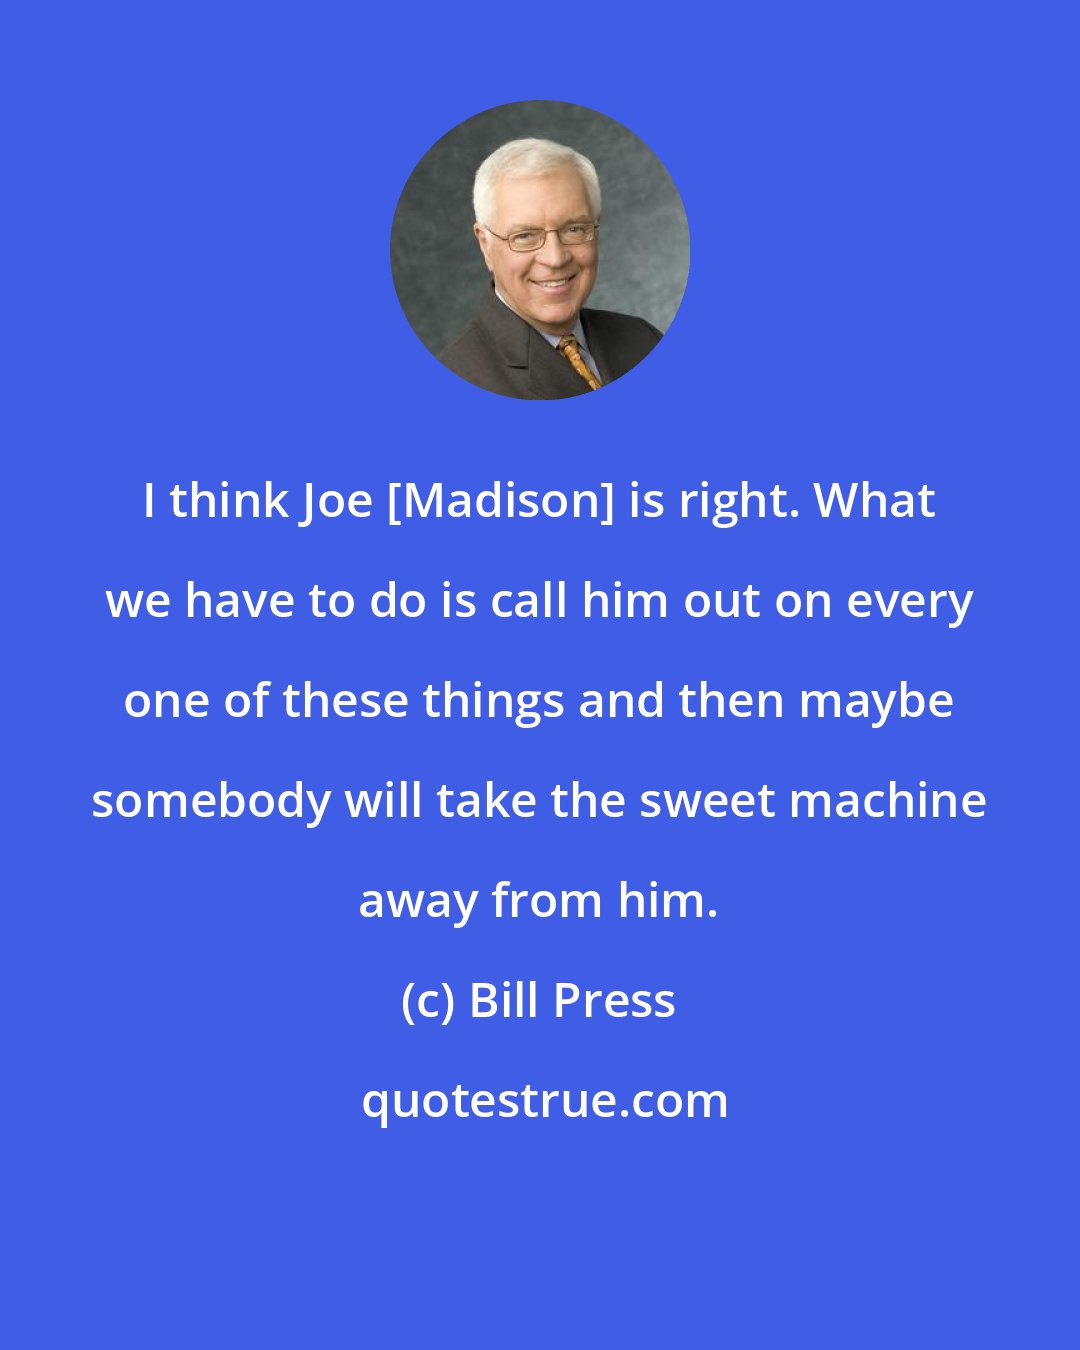 Bill Press: I think Joe [Madison] is right. What we have to do is call him out on every one of these things and then maybe somebody will take the sweet machine away from him.